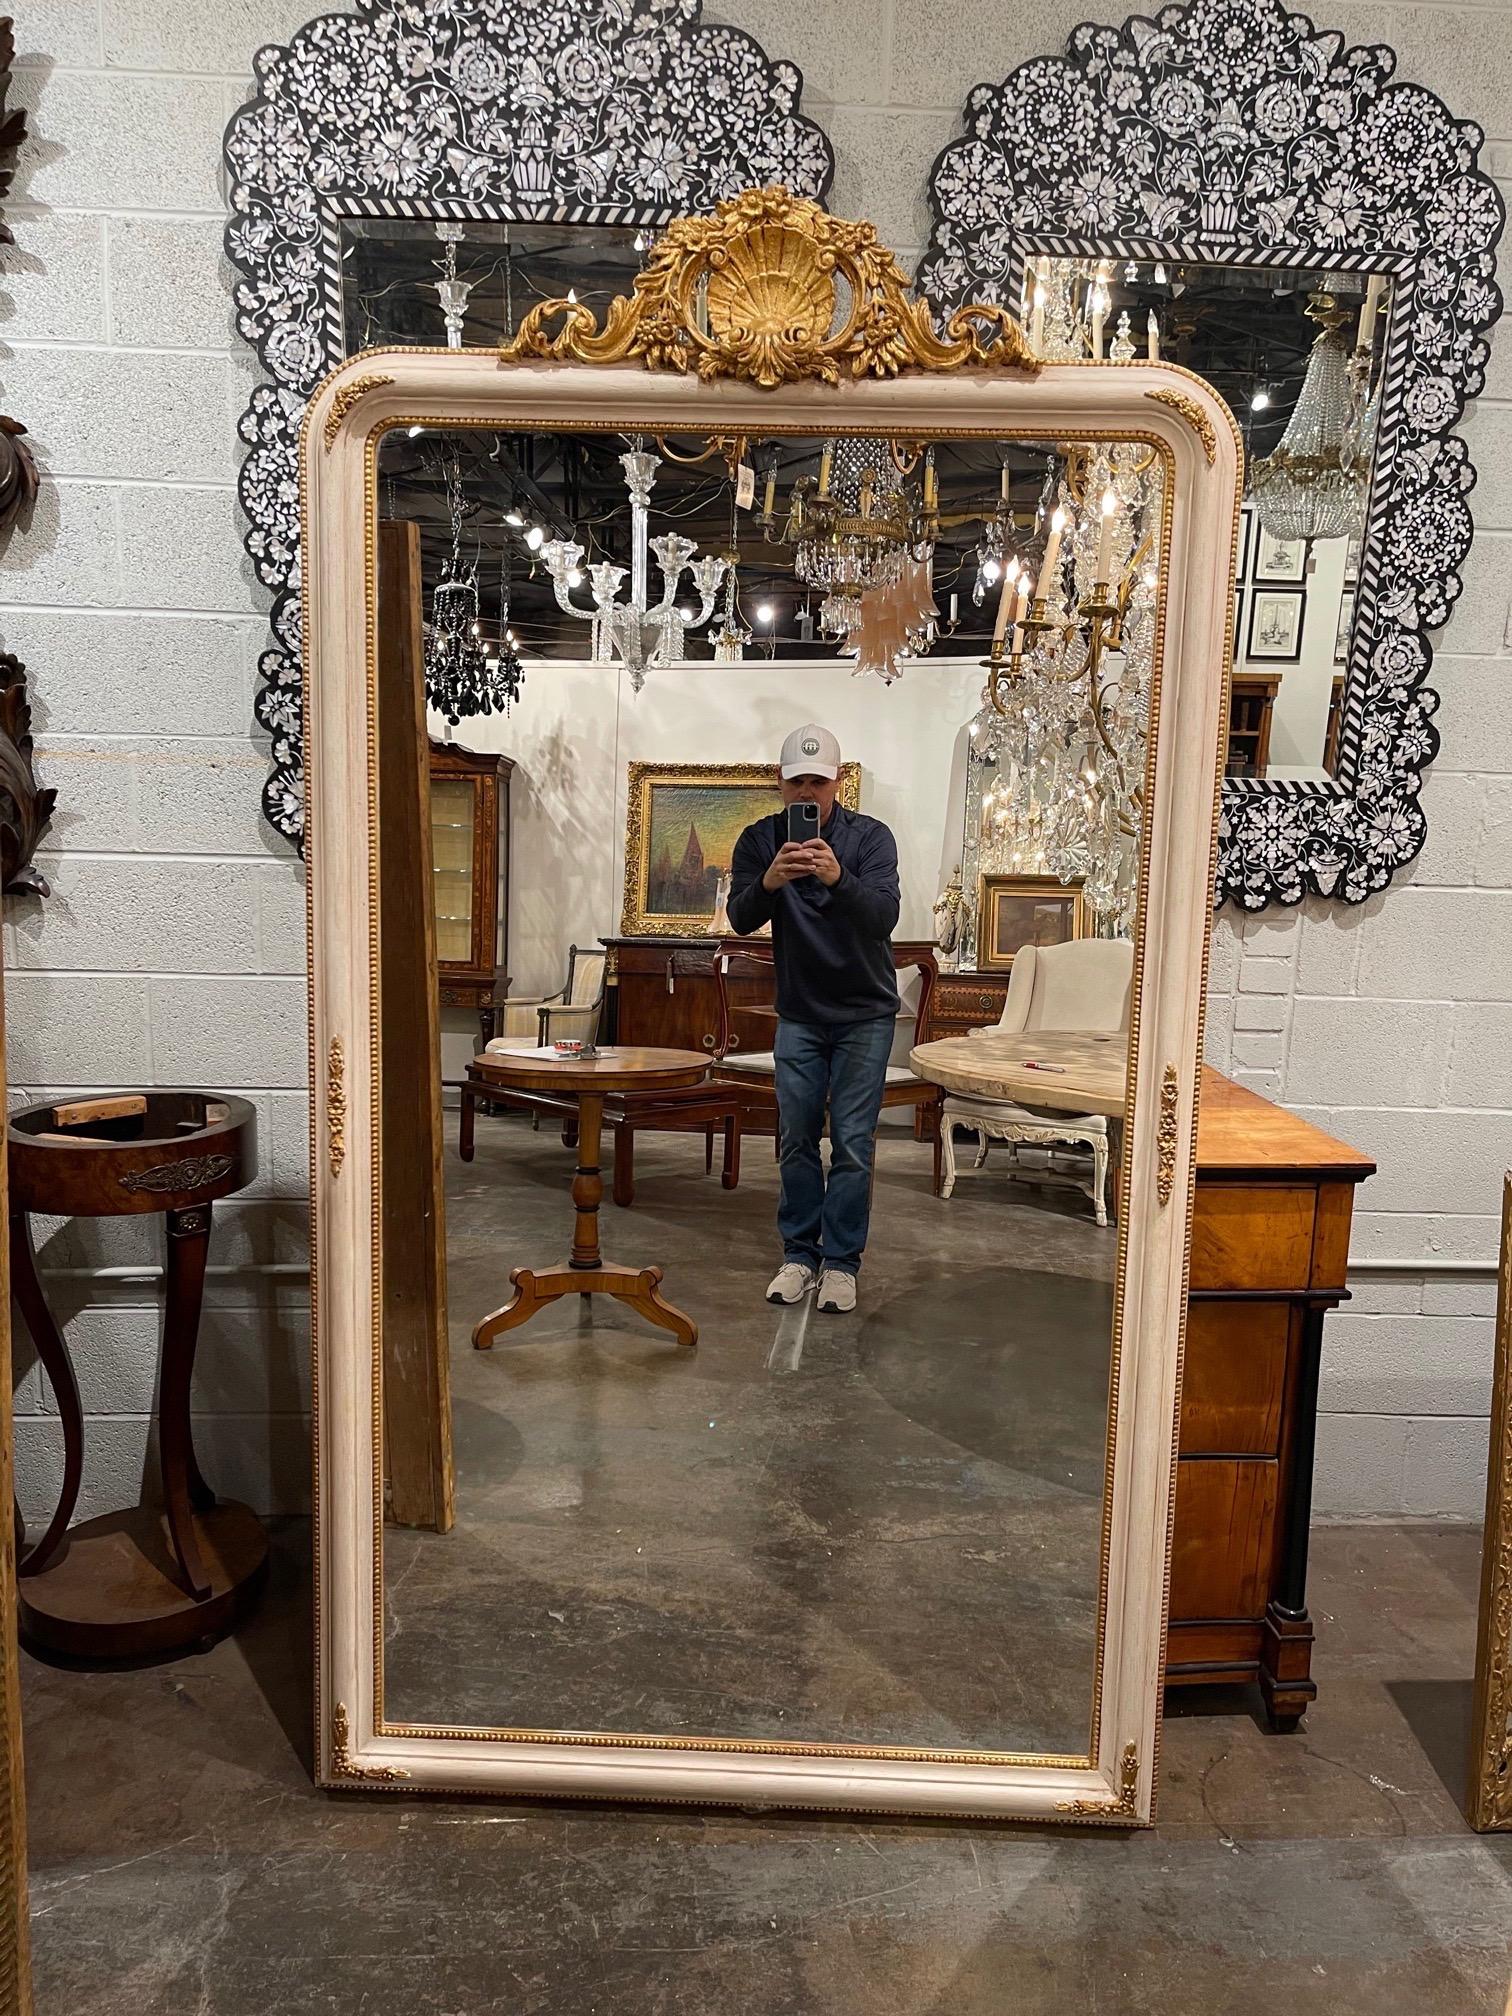 Exquisite Italian carved and painted classical Louis XV style mirrors. Pretty colors of creme and gold and
beautifully carved crown at the top. So elegant!! Note: Price listed is per item.